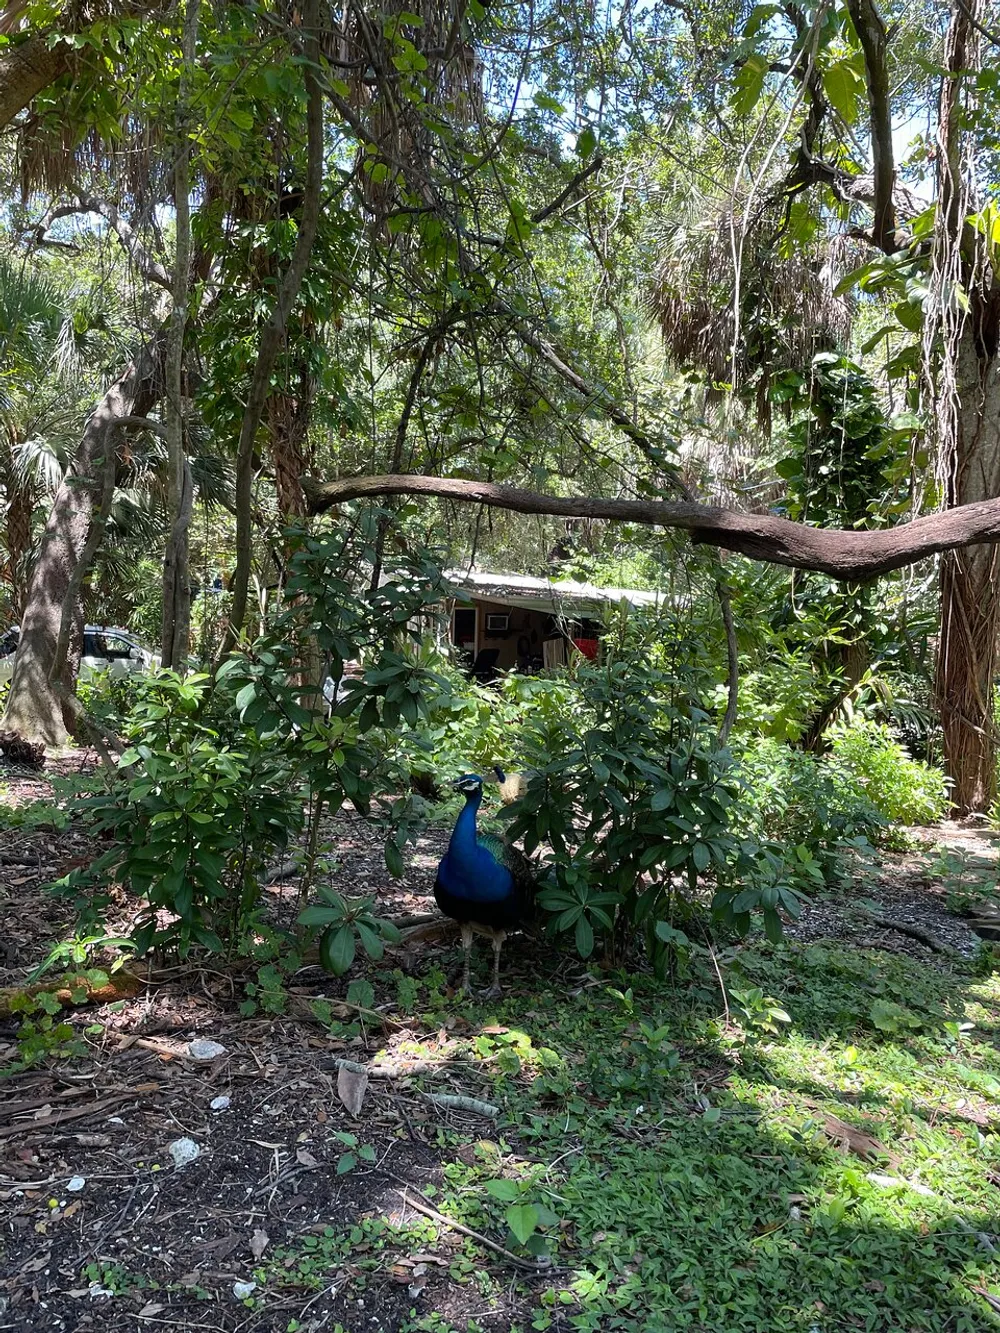 A peacock stands prominently in a lush green environment with dense foliage and a rustic building in the background